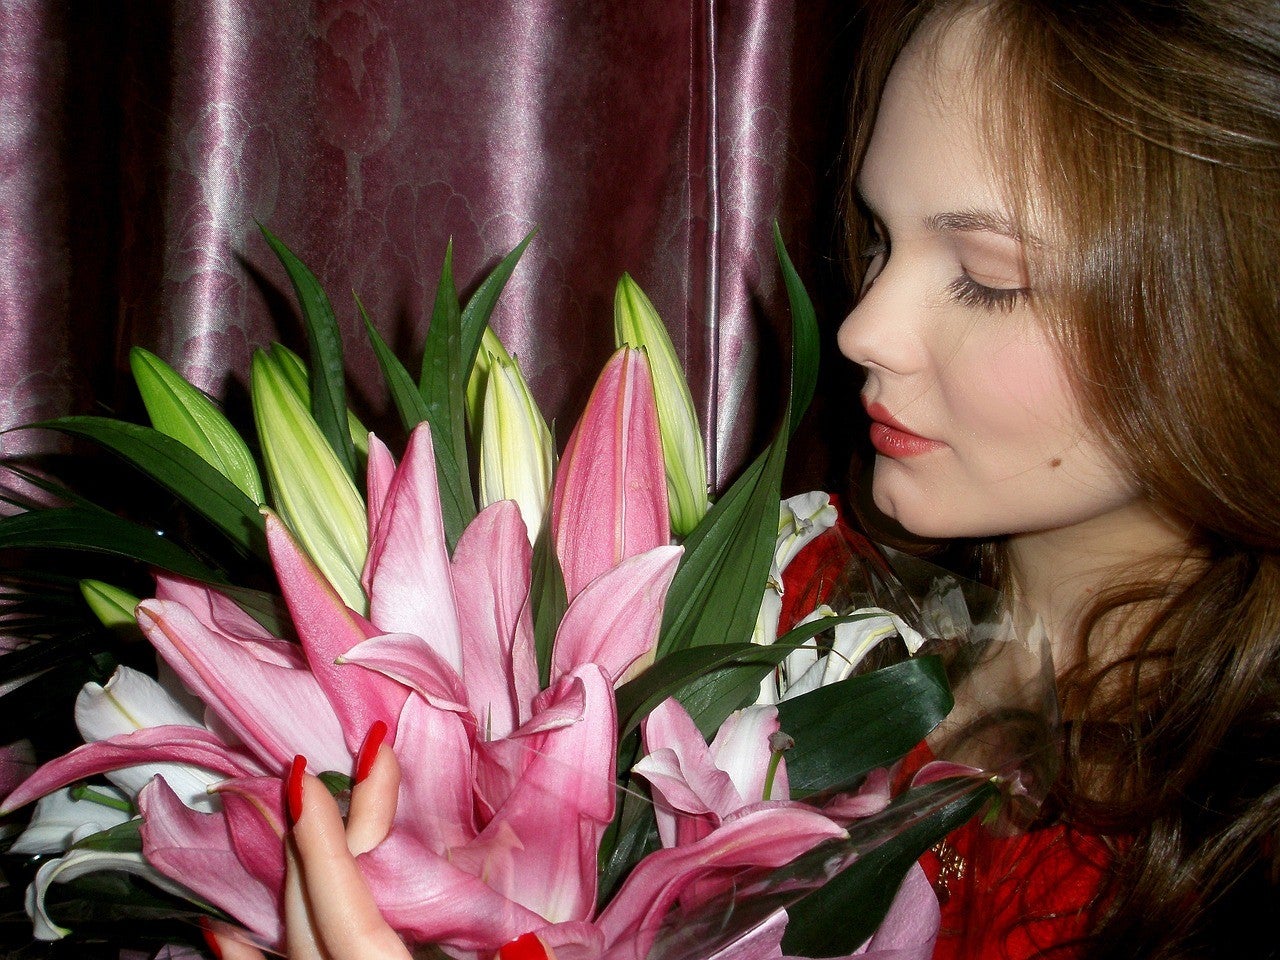 A Woman holding a bouquet of pink lilies